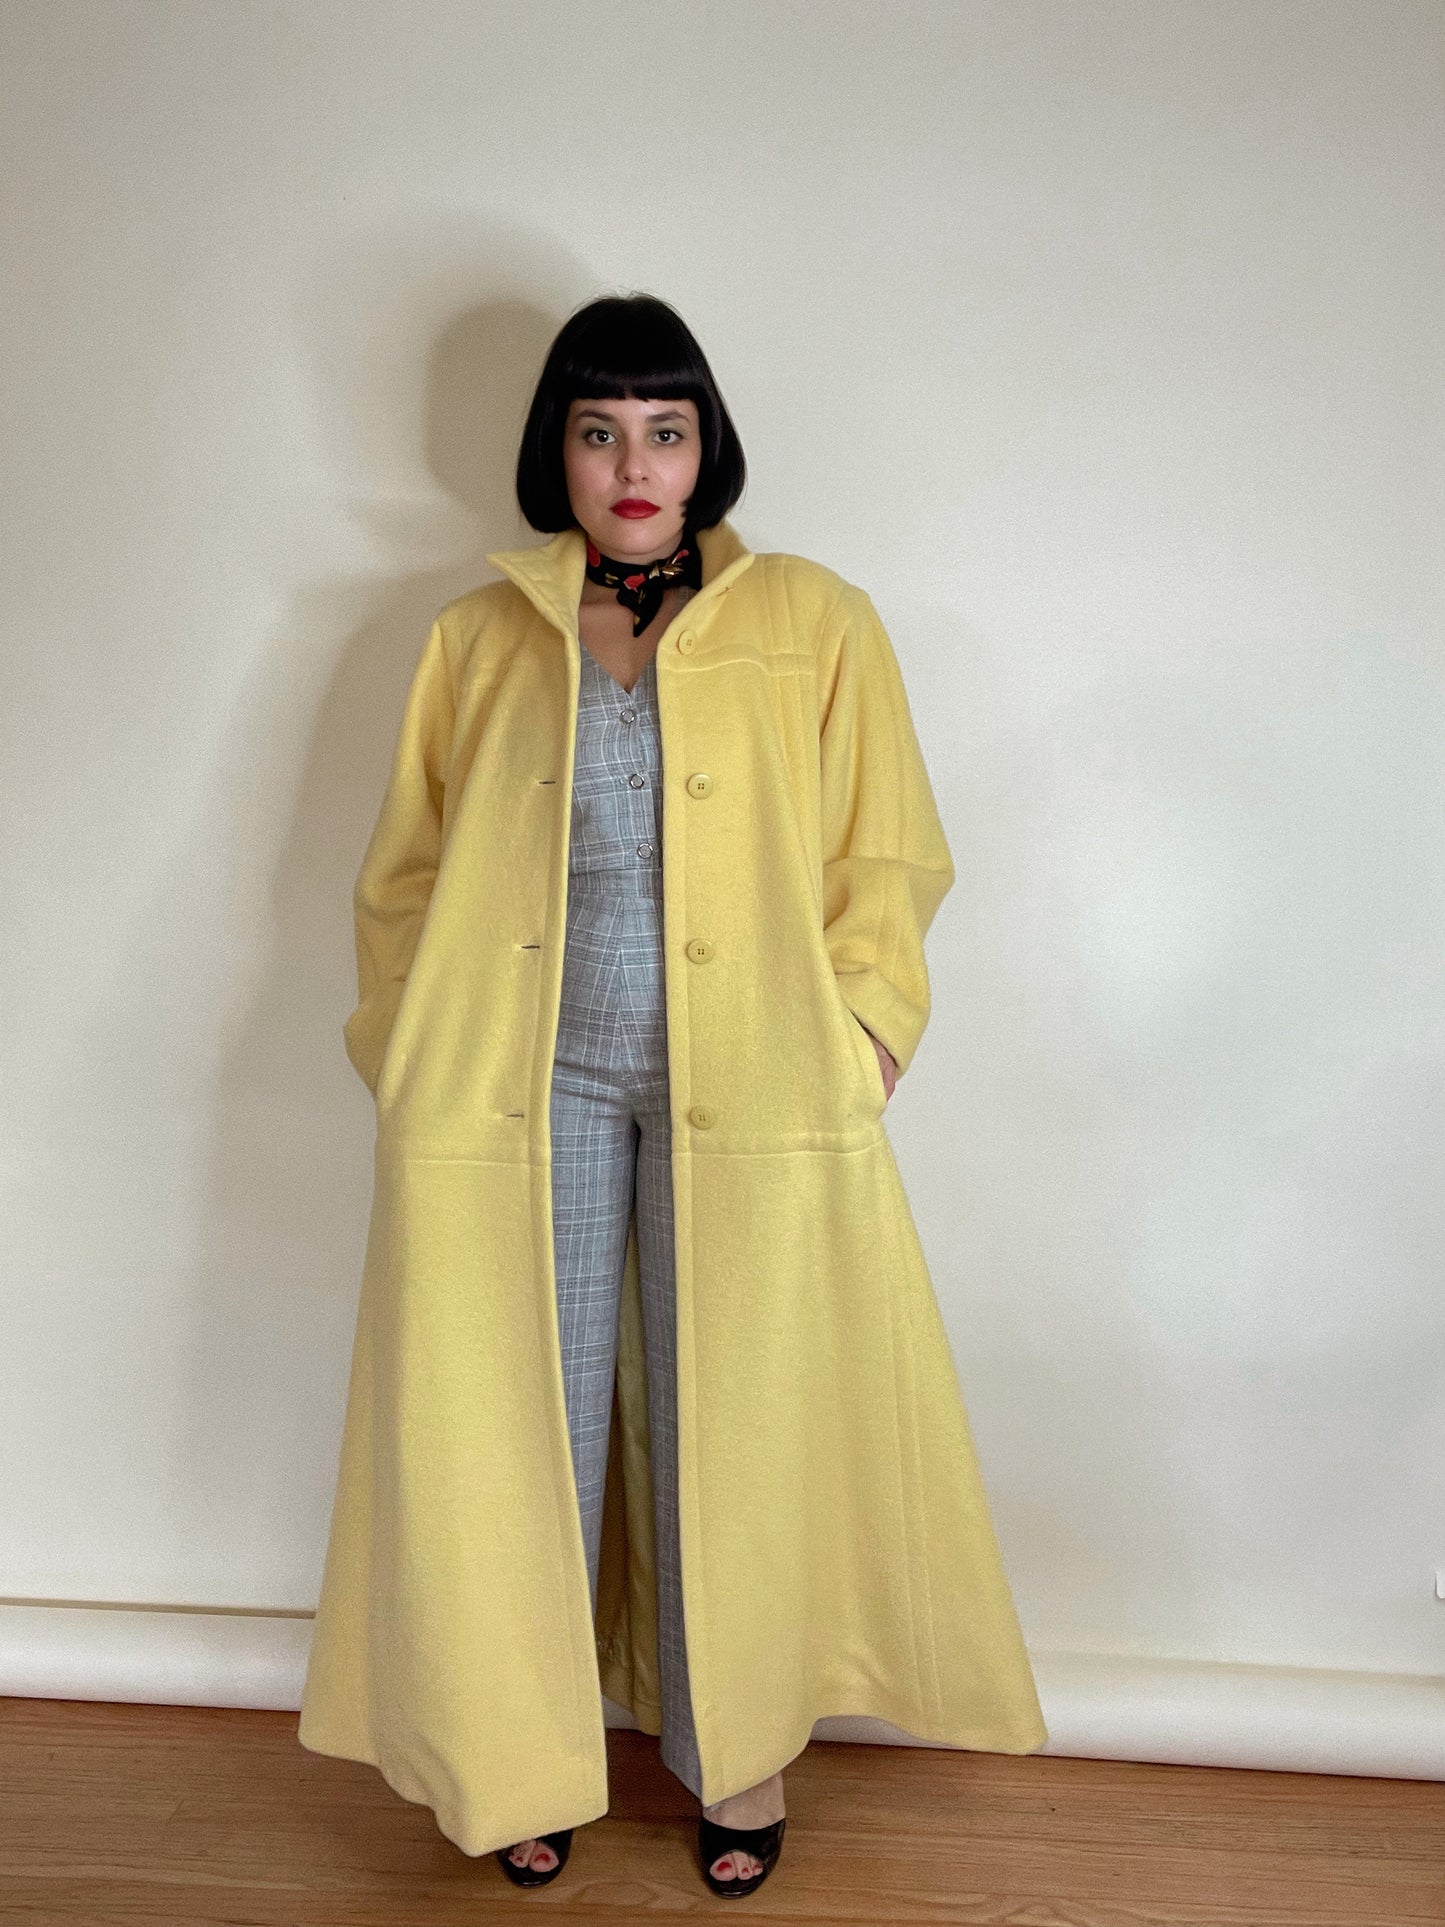 Vintage 80s 90s "Escada by Margaretha Ley" Made in Germany Yellow Wool Coat One Size Fits Most